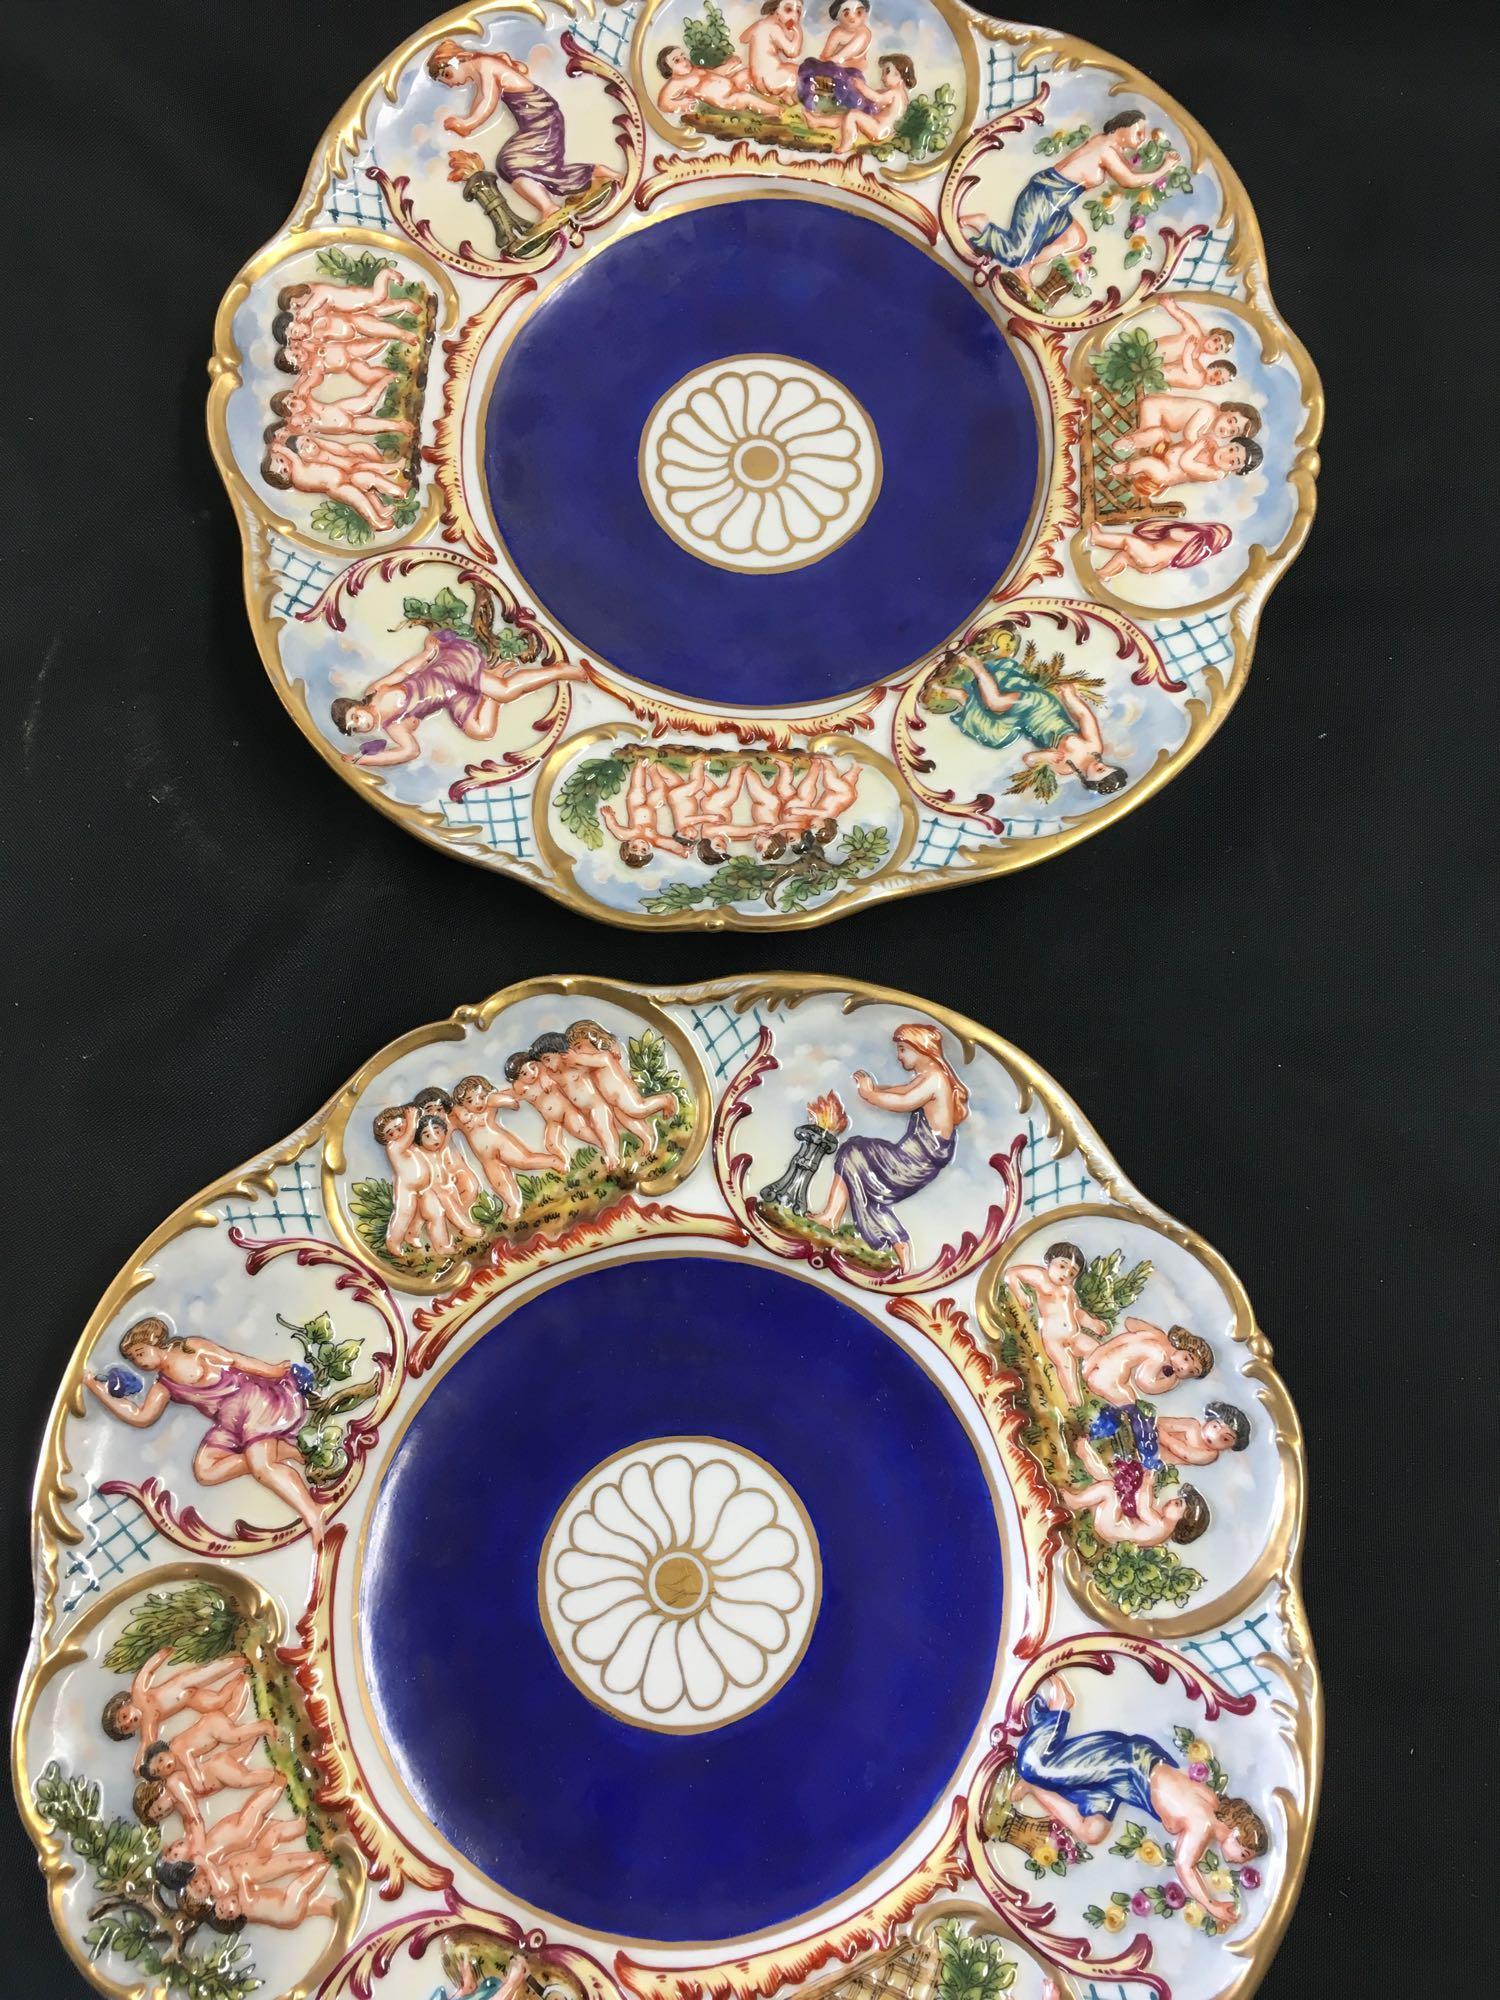 10 in. Vintage plates. Has note info with "early 19th c signed and dated Capidomonte plates"